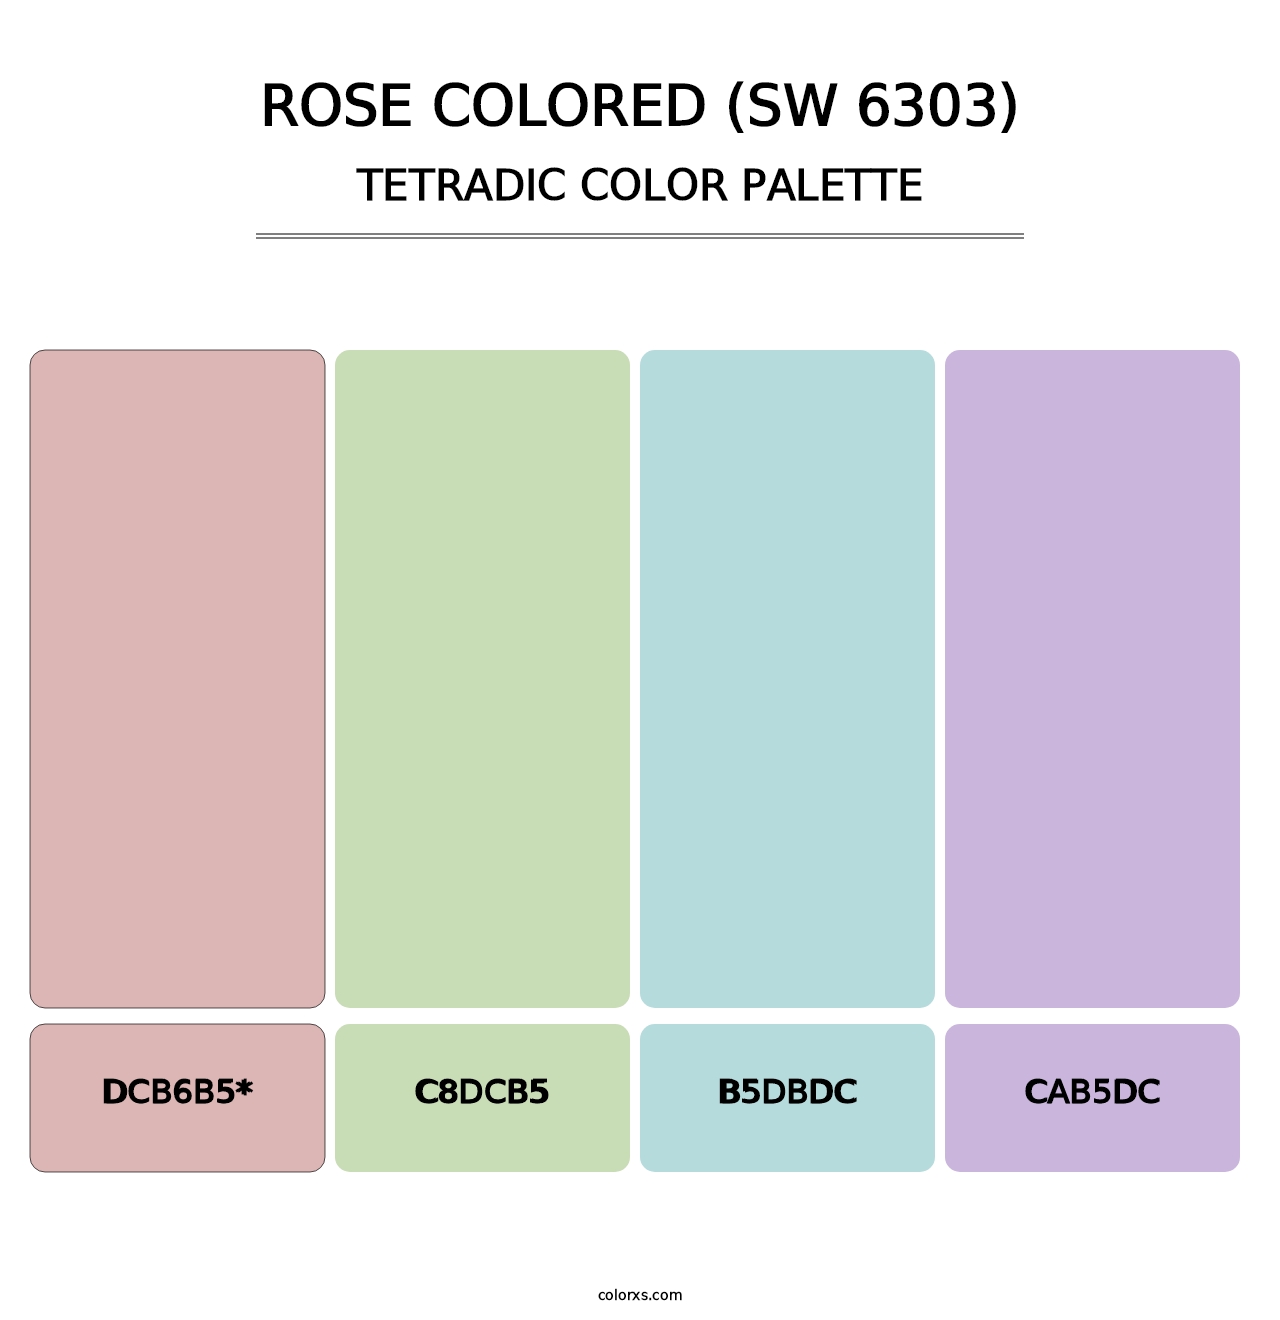 Rose Colored (SW 6303) - Tetradic Color Palette